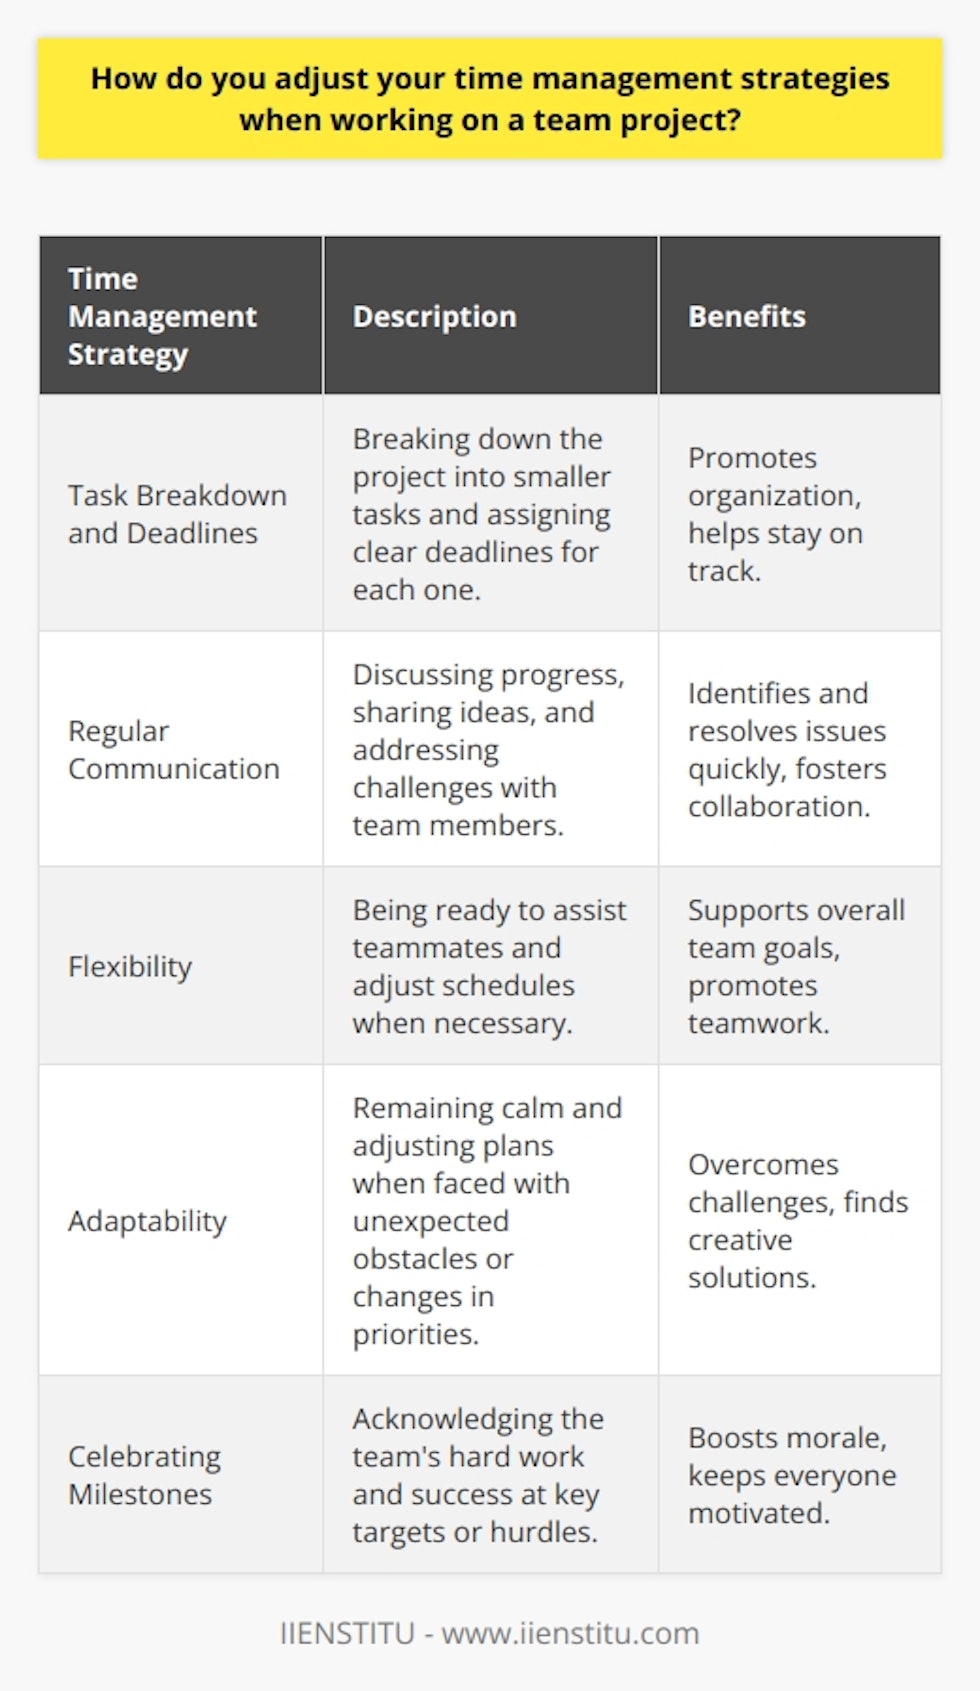 When working on a team project, I adjust my time management strategies to ensure successful collaboration and completion. I start by breaking down the project into smaller, manageable tasks and assigning clear deadlines for each one. This helps me and my teammates stay organized and on track. Prioritizing Communication I make it a priority to communicate regularly with my team members. We discuss our progress, share ideas, and address any challenges that arise. By staying in close contact, we can quickly identify and resolve any issues that may impact our timeline. Flexibility is Key I understand that when working on a team, flexibility is crucial. If a teammate needs assistance or falls behind, Im always ready to step in and help out. Were all in this together, and sometimes that means adjusting my own schedule to support the teams overall goals. Adapting to Change In my experience, projects rarely go exactly as planned. Unexpected obstacles can pop up, or priorities can shift. When this happens, I remain calm and adaptable. I work with my team to reassess our timeline, make necessary adjustments, and find creative solutions to keep us moving forward. Celebrating Milestones Finally, I believe in the power of celebrating milestones along the way. When we hit a key target or overcome a significant hurdle, I take a moment to acknowledge the teams hard work and success. This boosts morale and keeps everyone motivated to push through to the end. At the end of the day, effective time management in a team setting is all about communication, collaboration, and adaptability. By staying connected, supporting one another, and remaining flexible, we can achieve great things together.